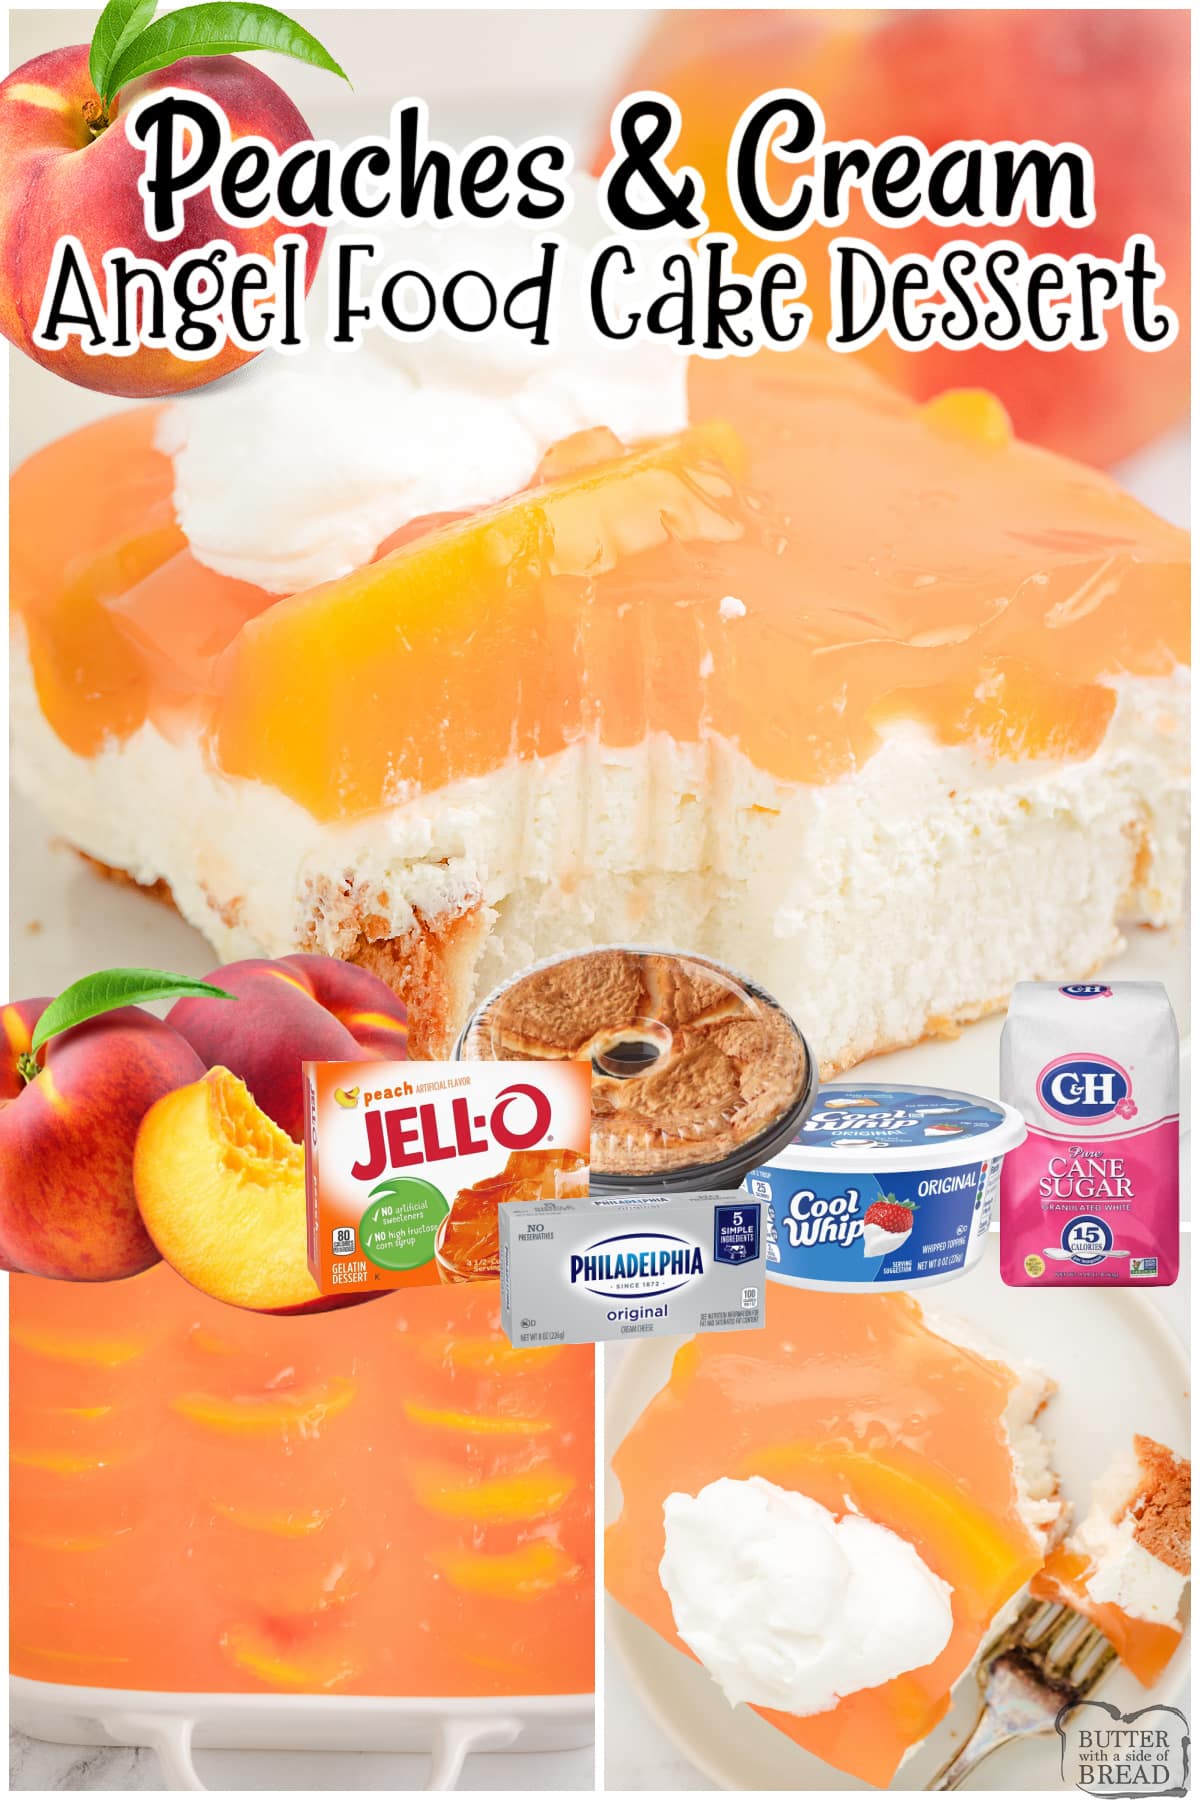 Peach Angel Food Cake Dessert is a light, refreshing treat made with angel food cake, peaches, jello & a sweet cream cheese topping! Perfect for using fresh peaches!